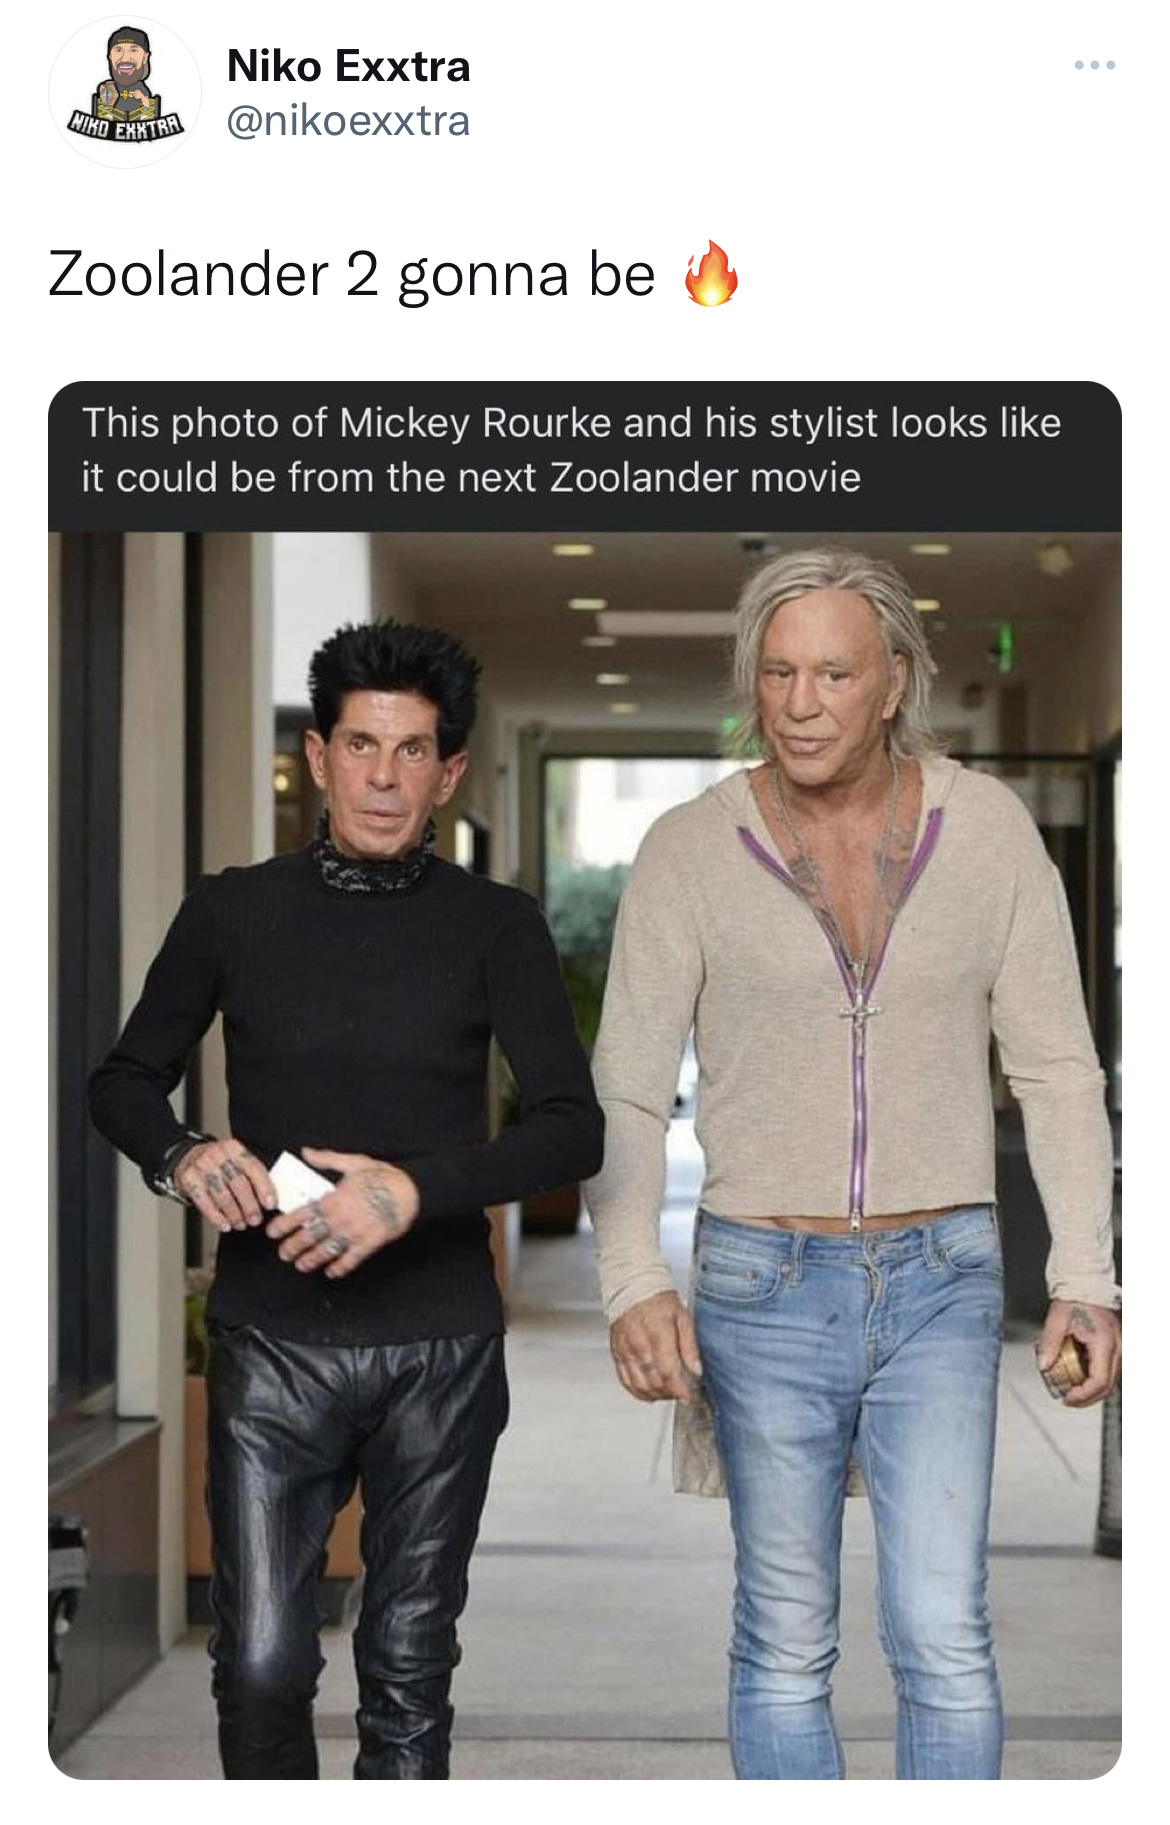 Savage and funny tweets - mickey rourke now - Niko Exxtra Zoolander 2 gonna be This photo of Mickey Rourke and his stylist looks it could be from the next Zoolander movie